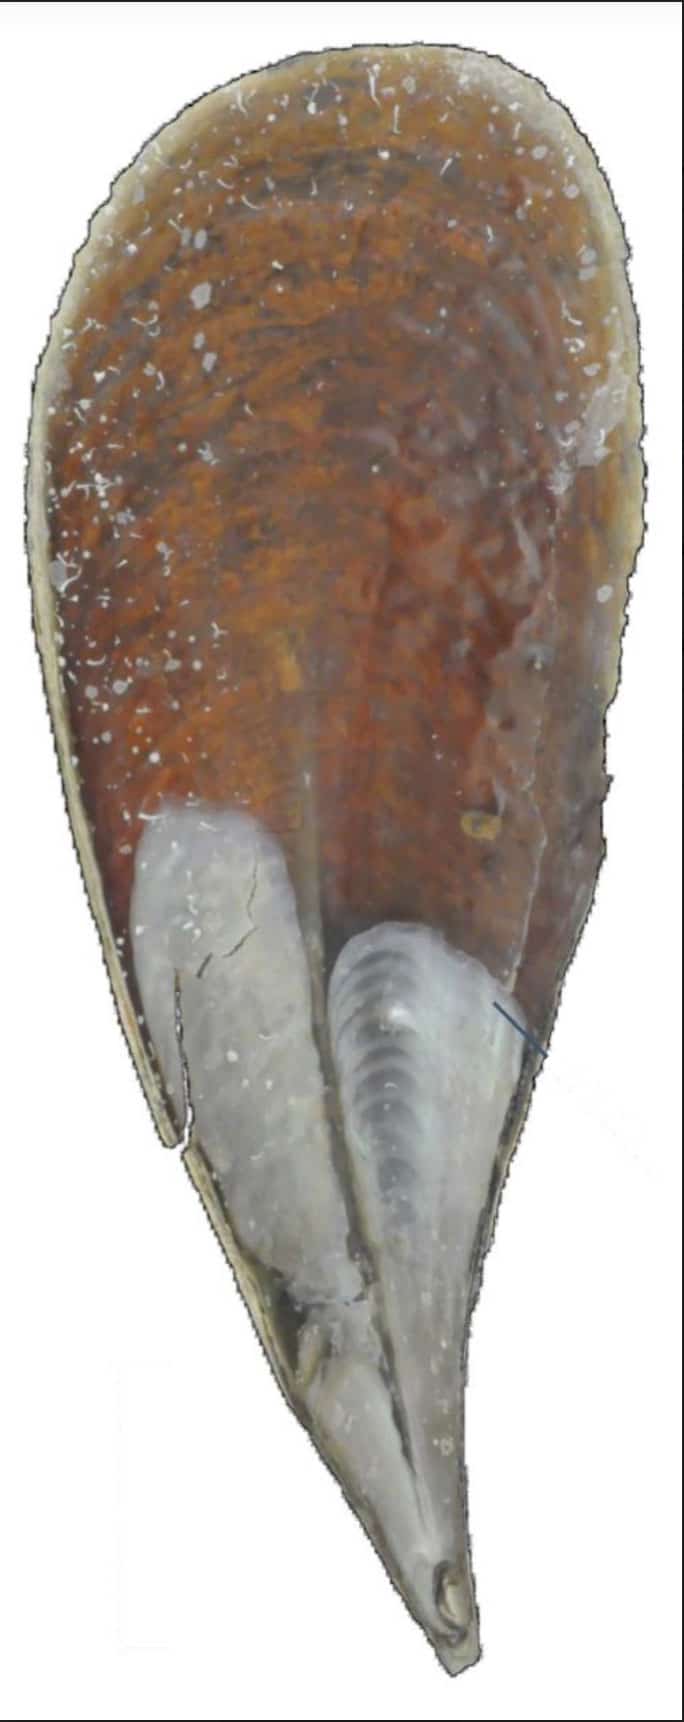 The shell of a fan mussel, or pinna nobilis. Image credit: Hovden Lab